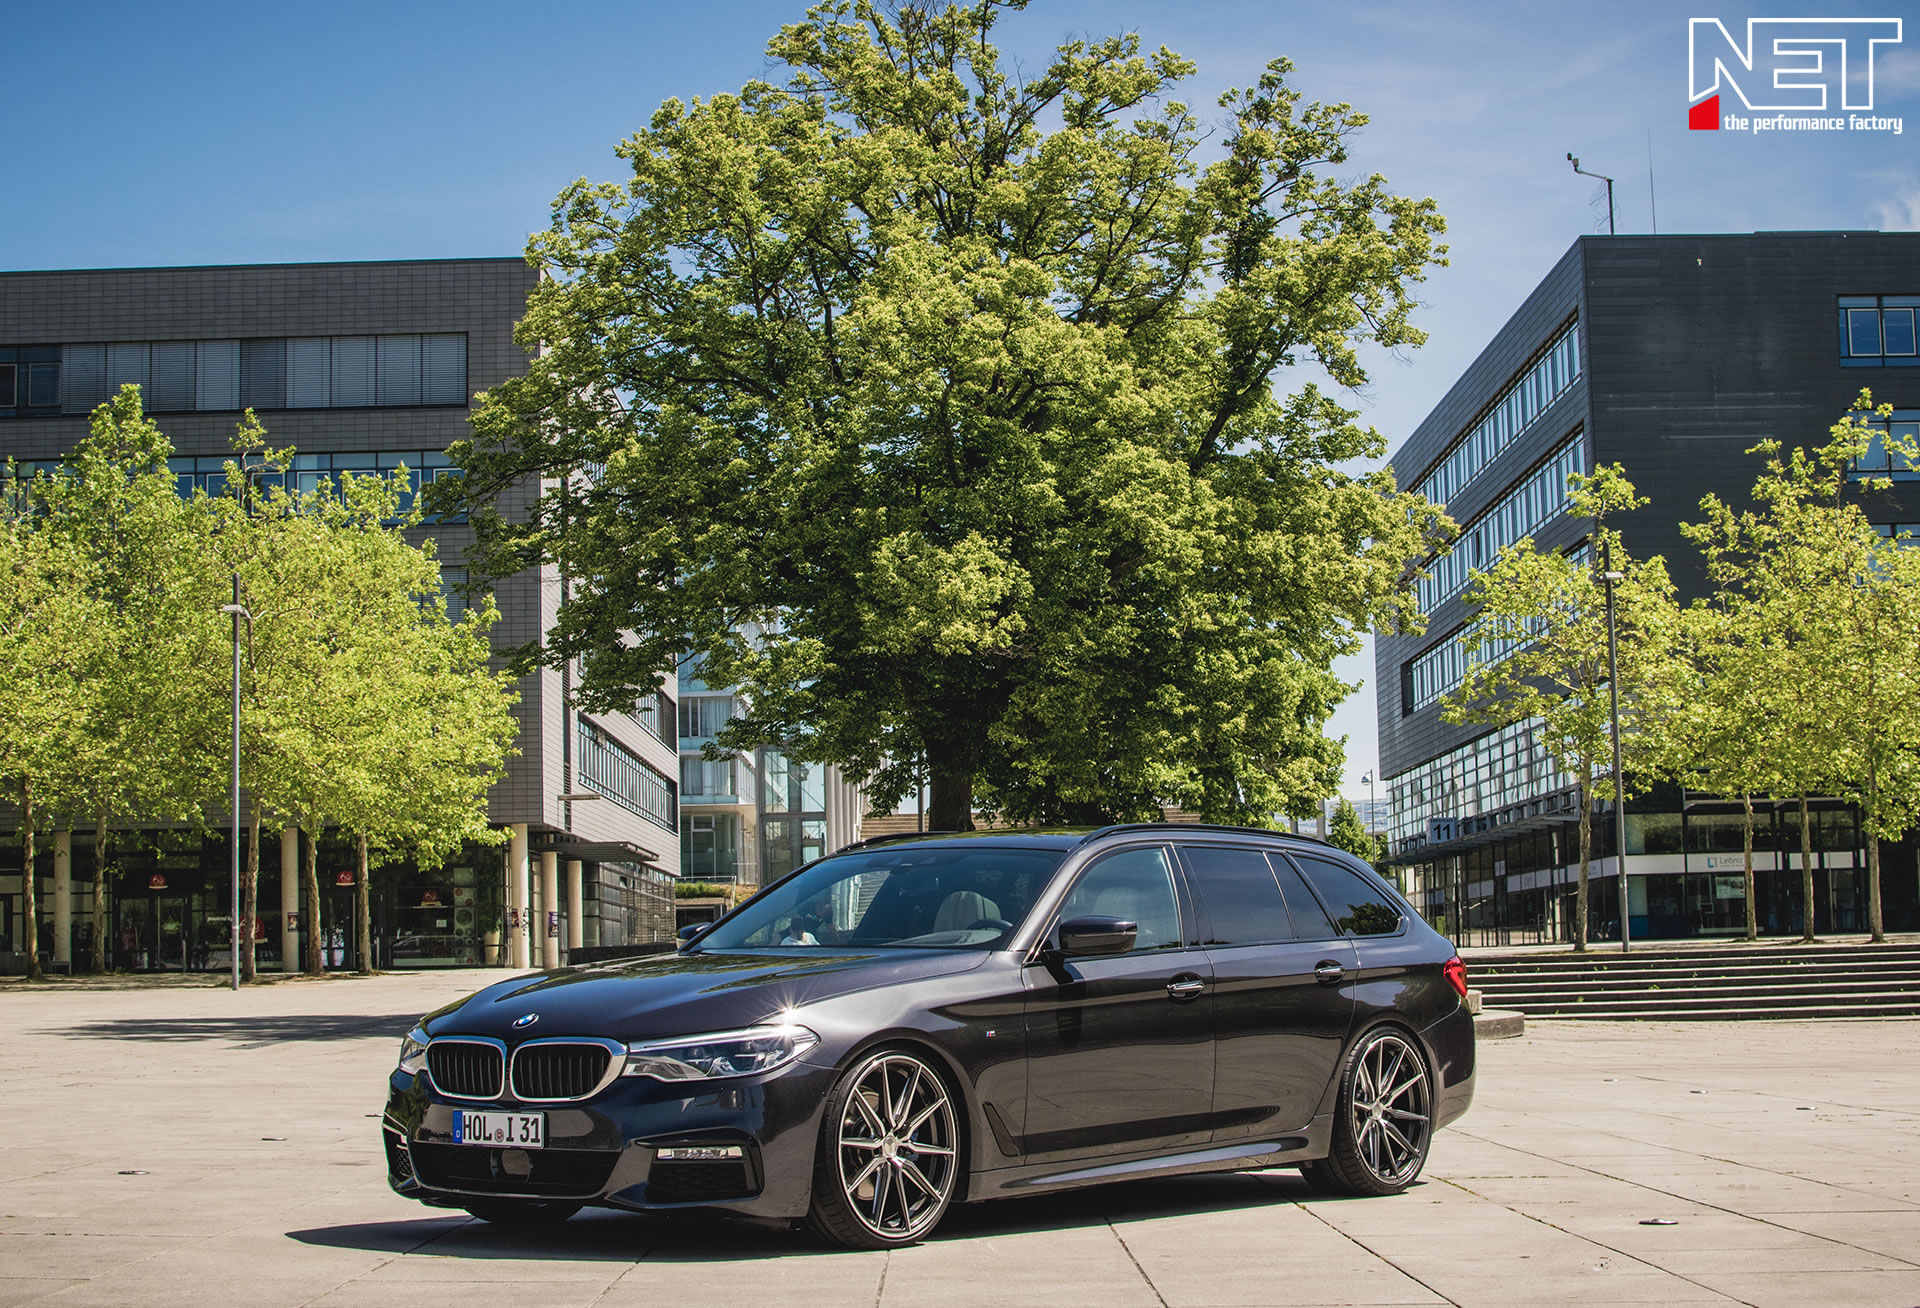 NET Galerie Car Tuning - BMW 530xd Touring (G31) - Chiptuning BMW 1-9